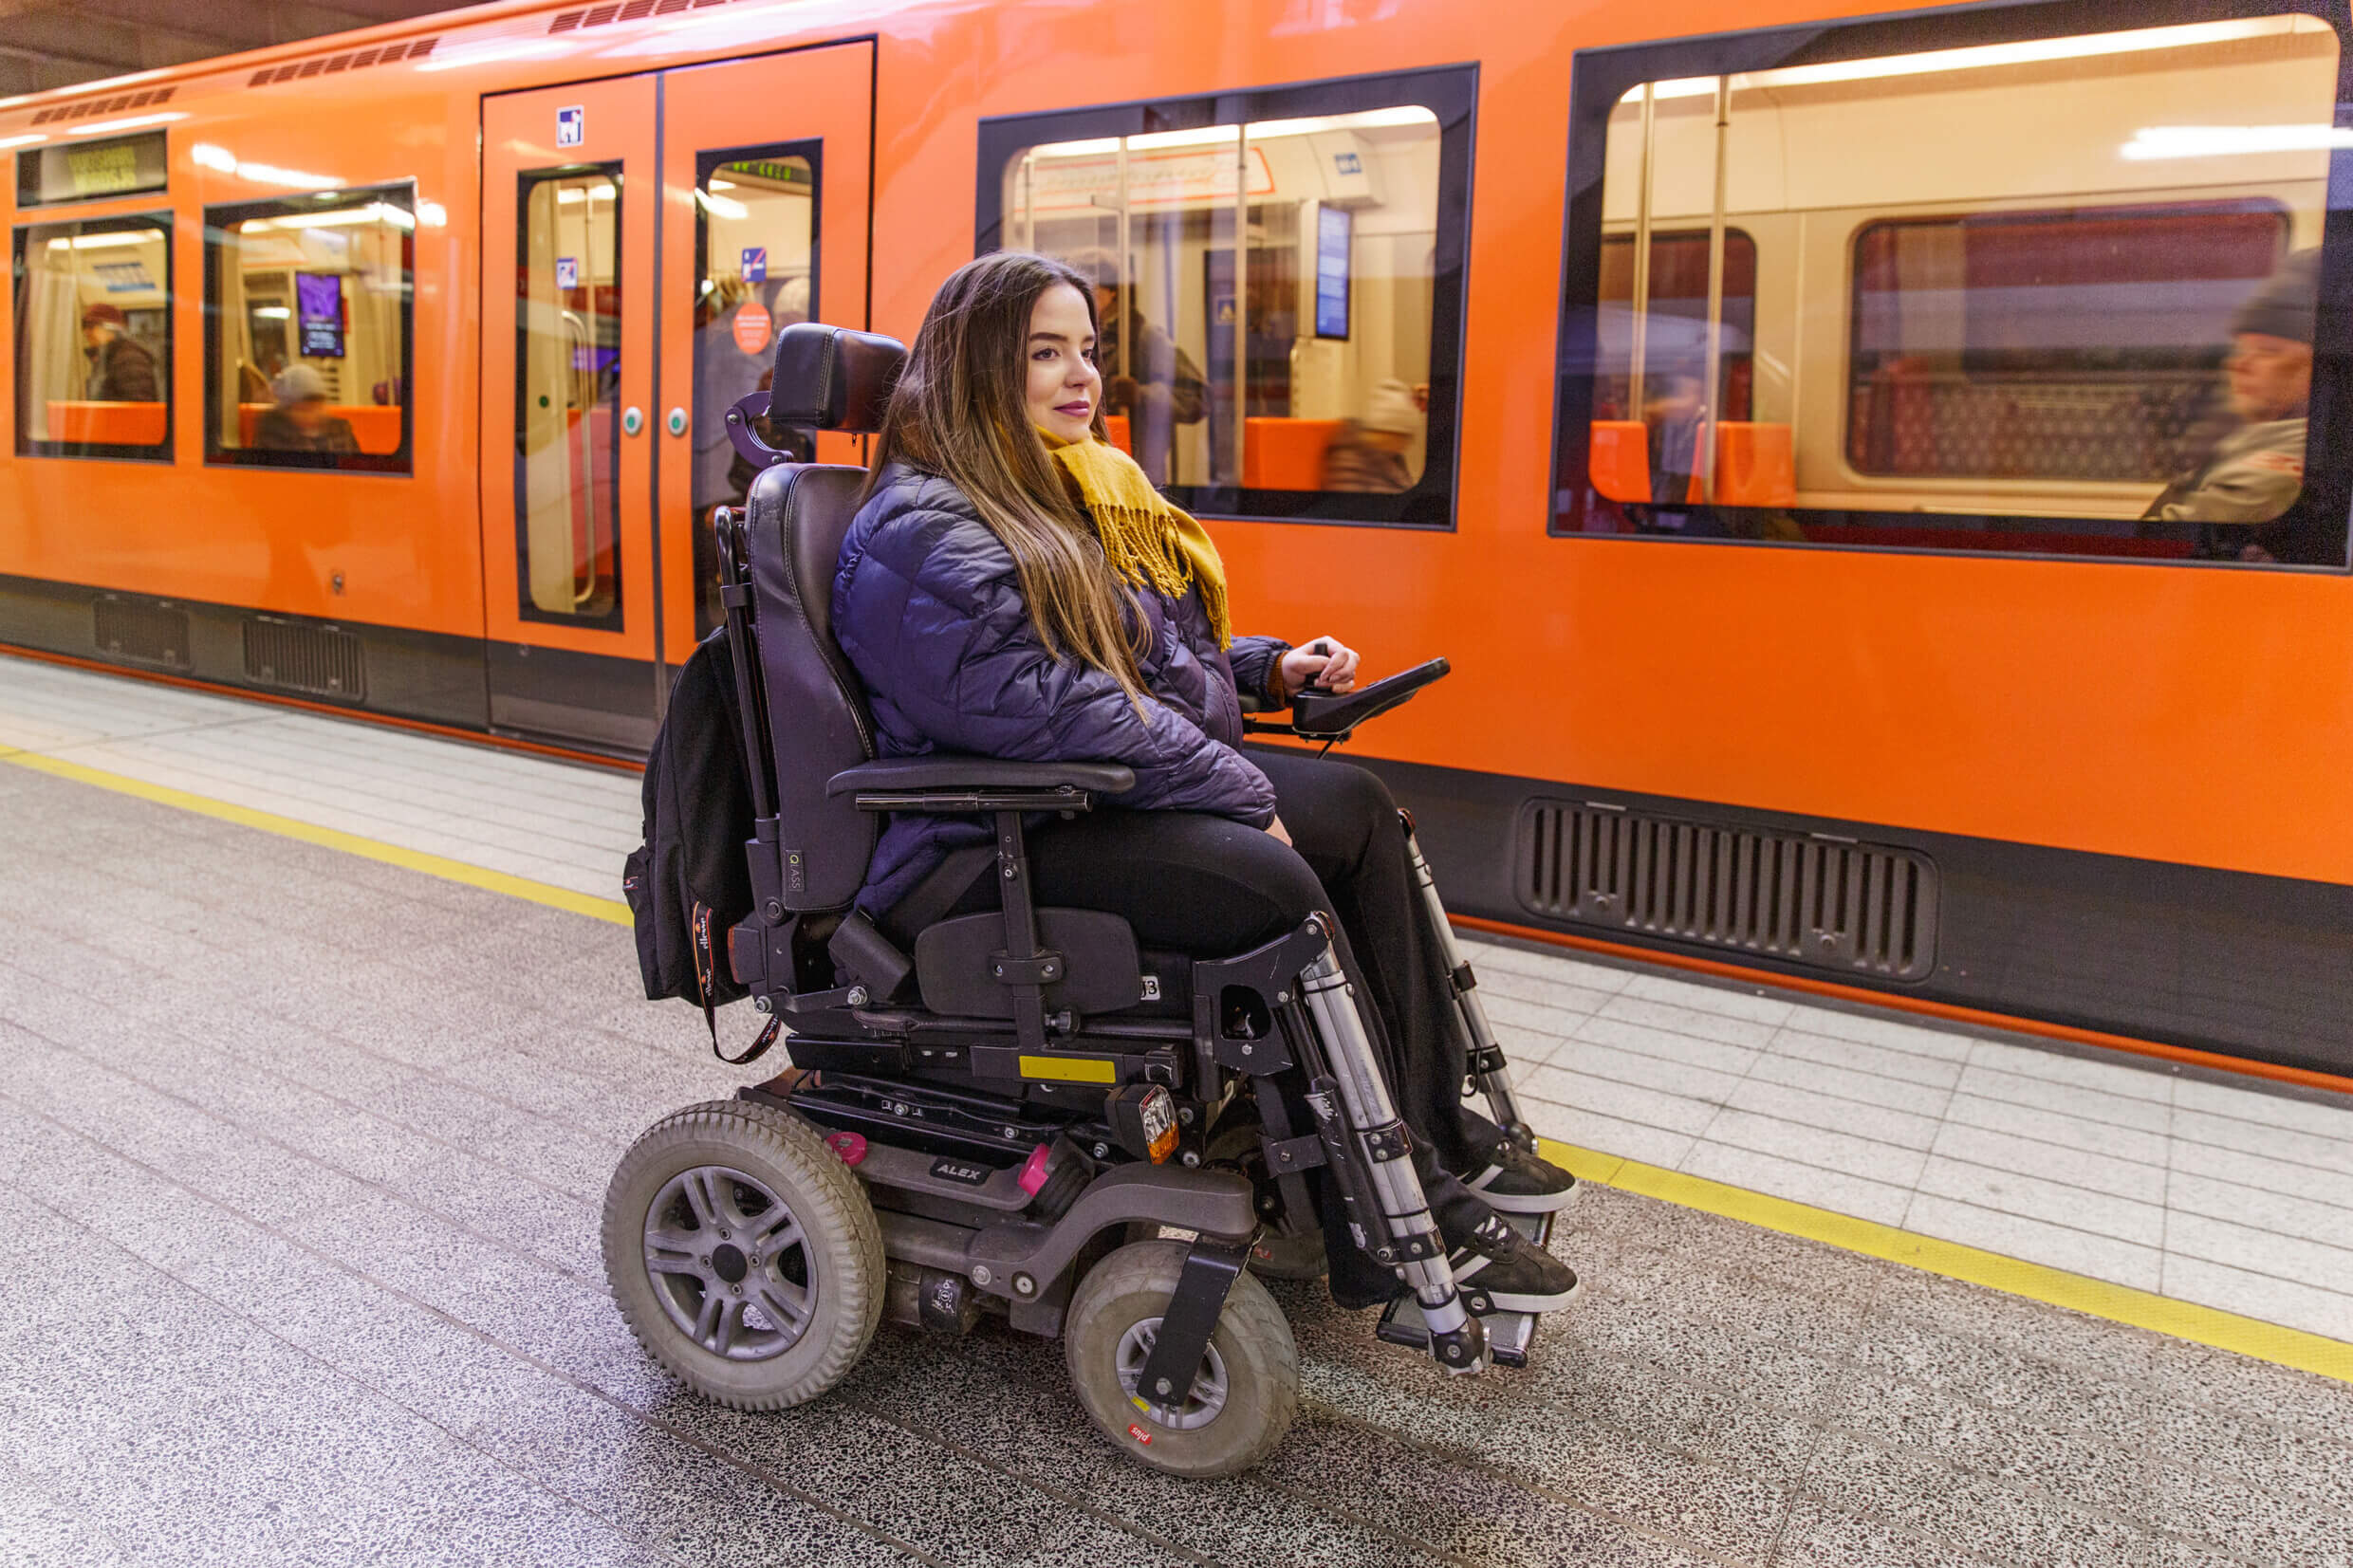 Woman waits for a metro sitting in a electric wheelchair.